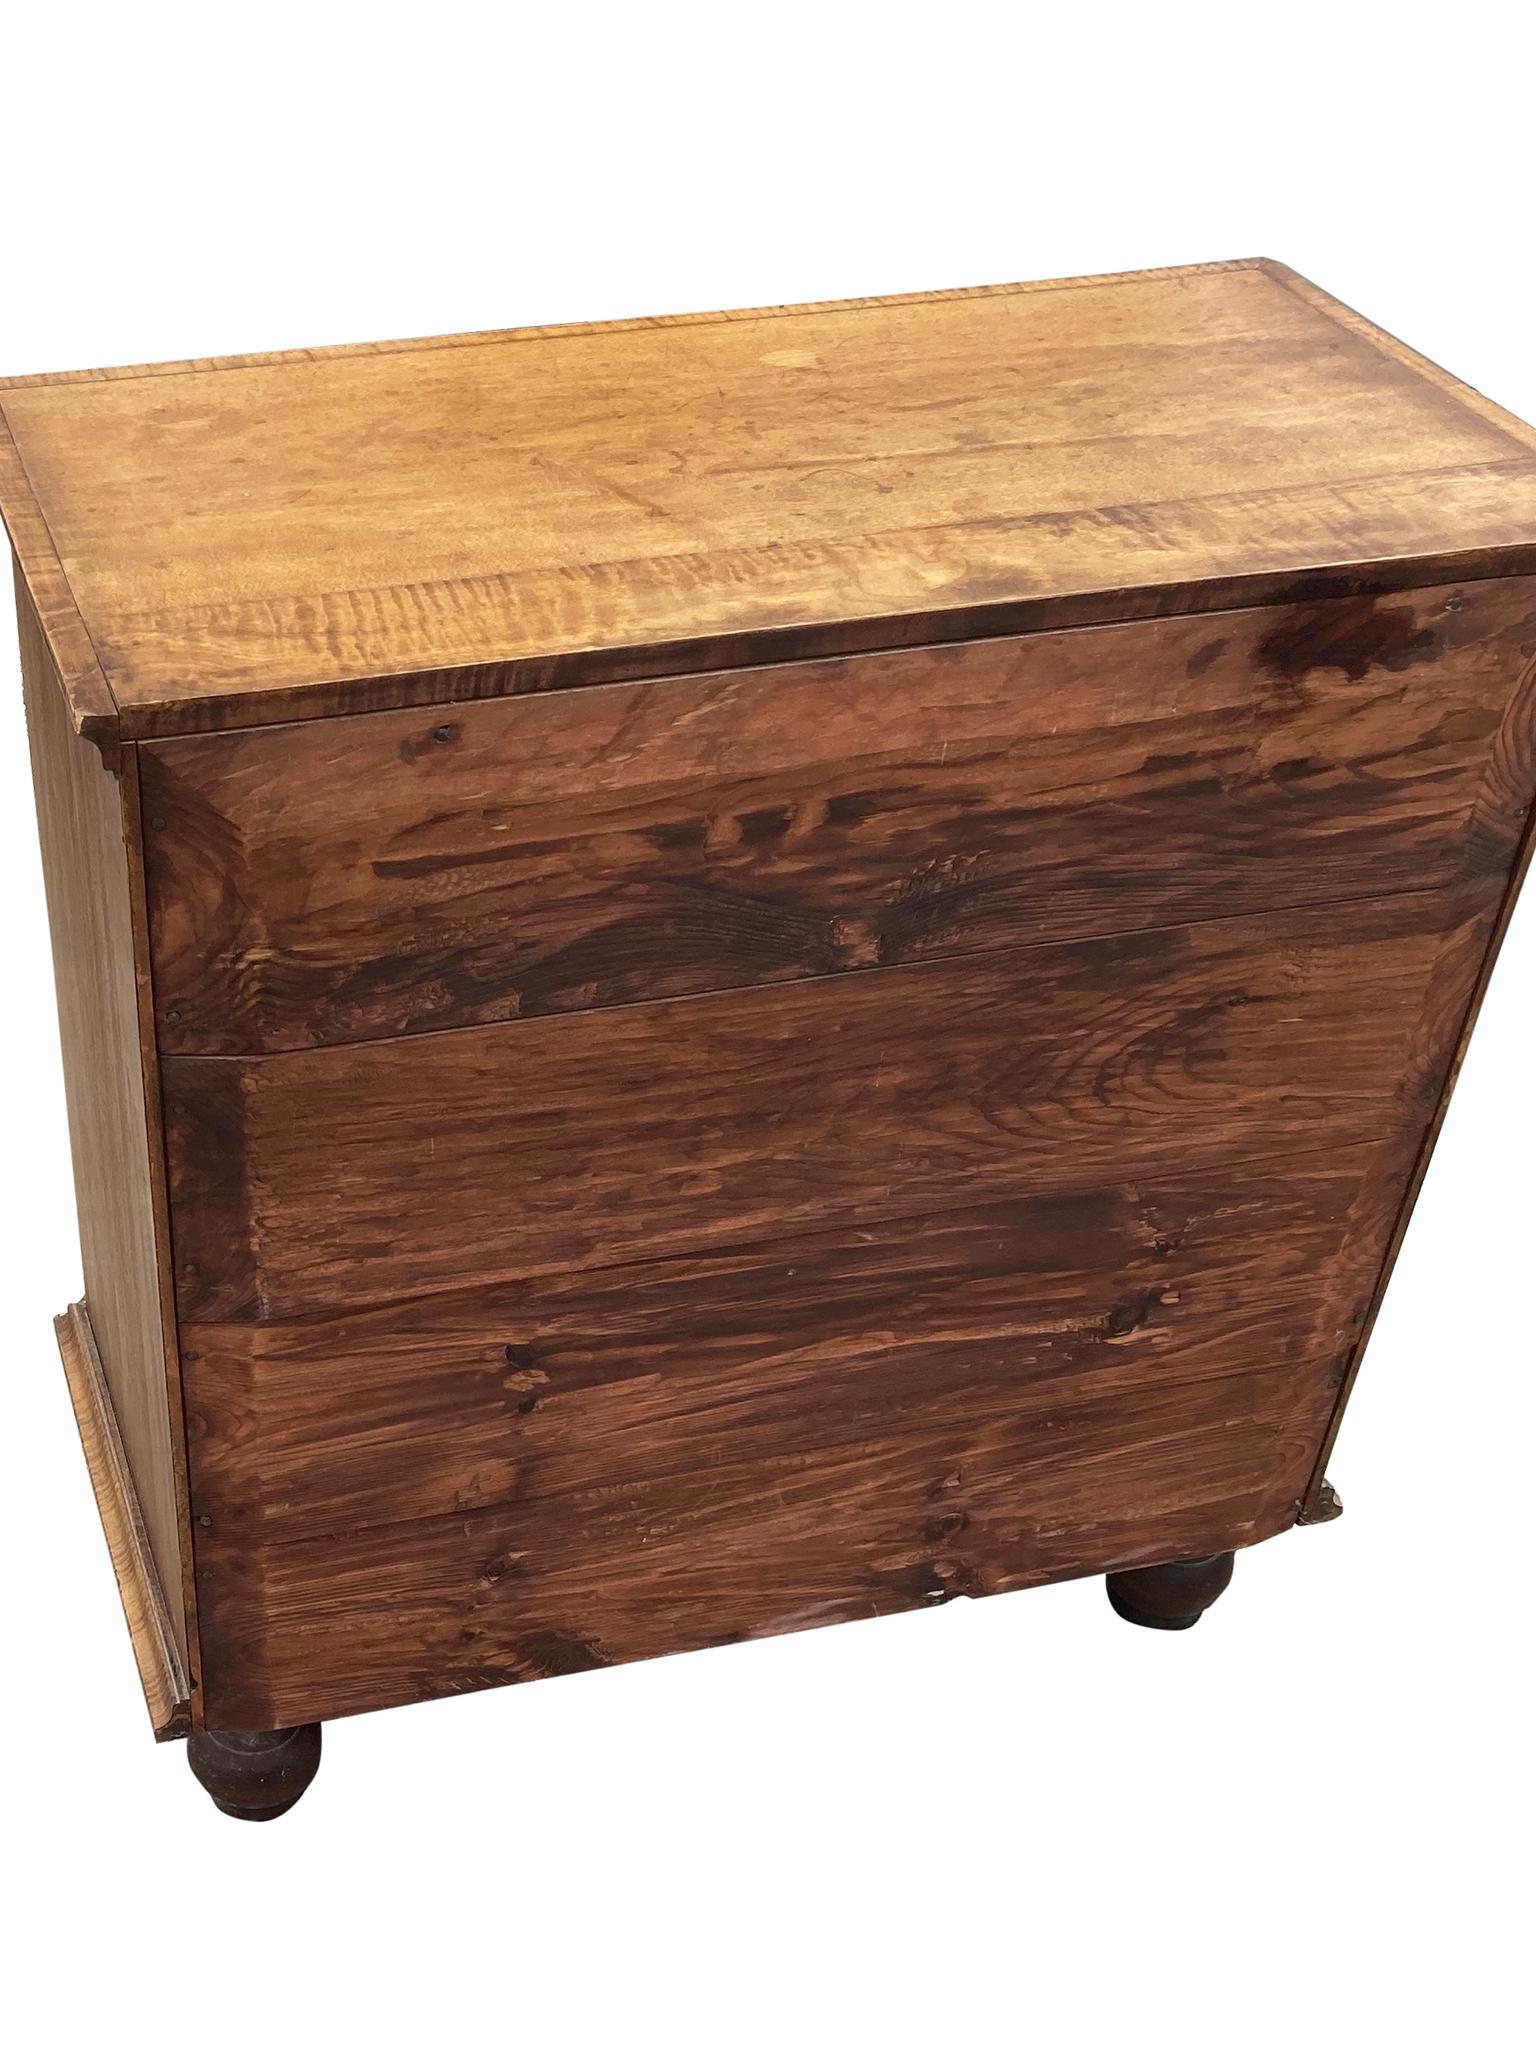 20th Century William & Mary-Style Maple Chest of Drawers 5